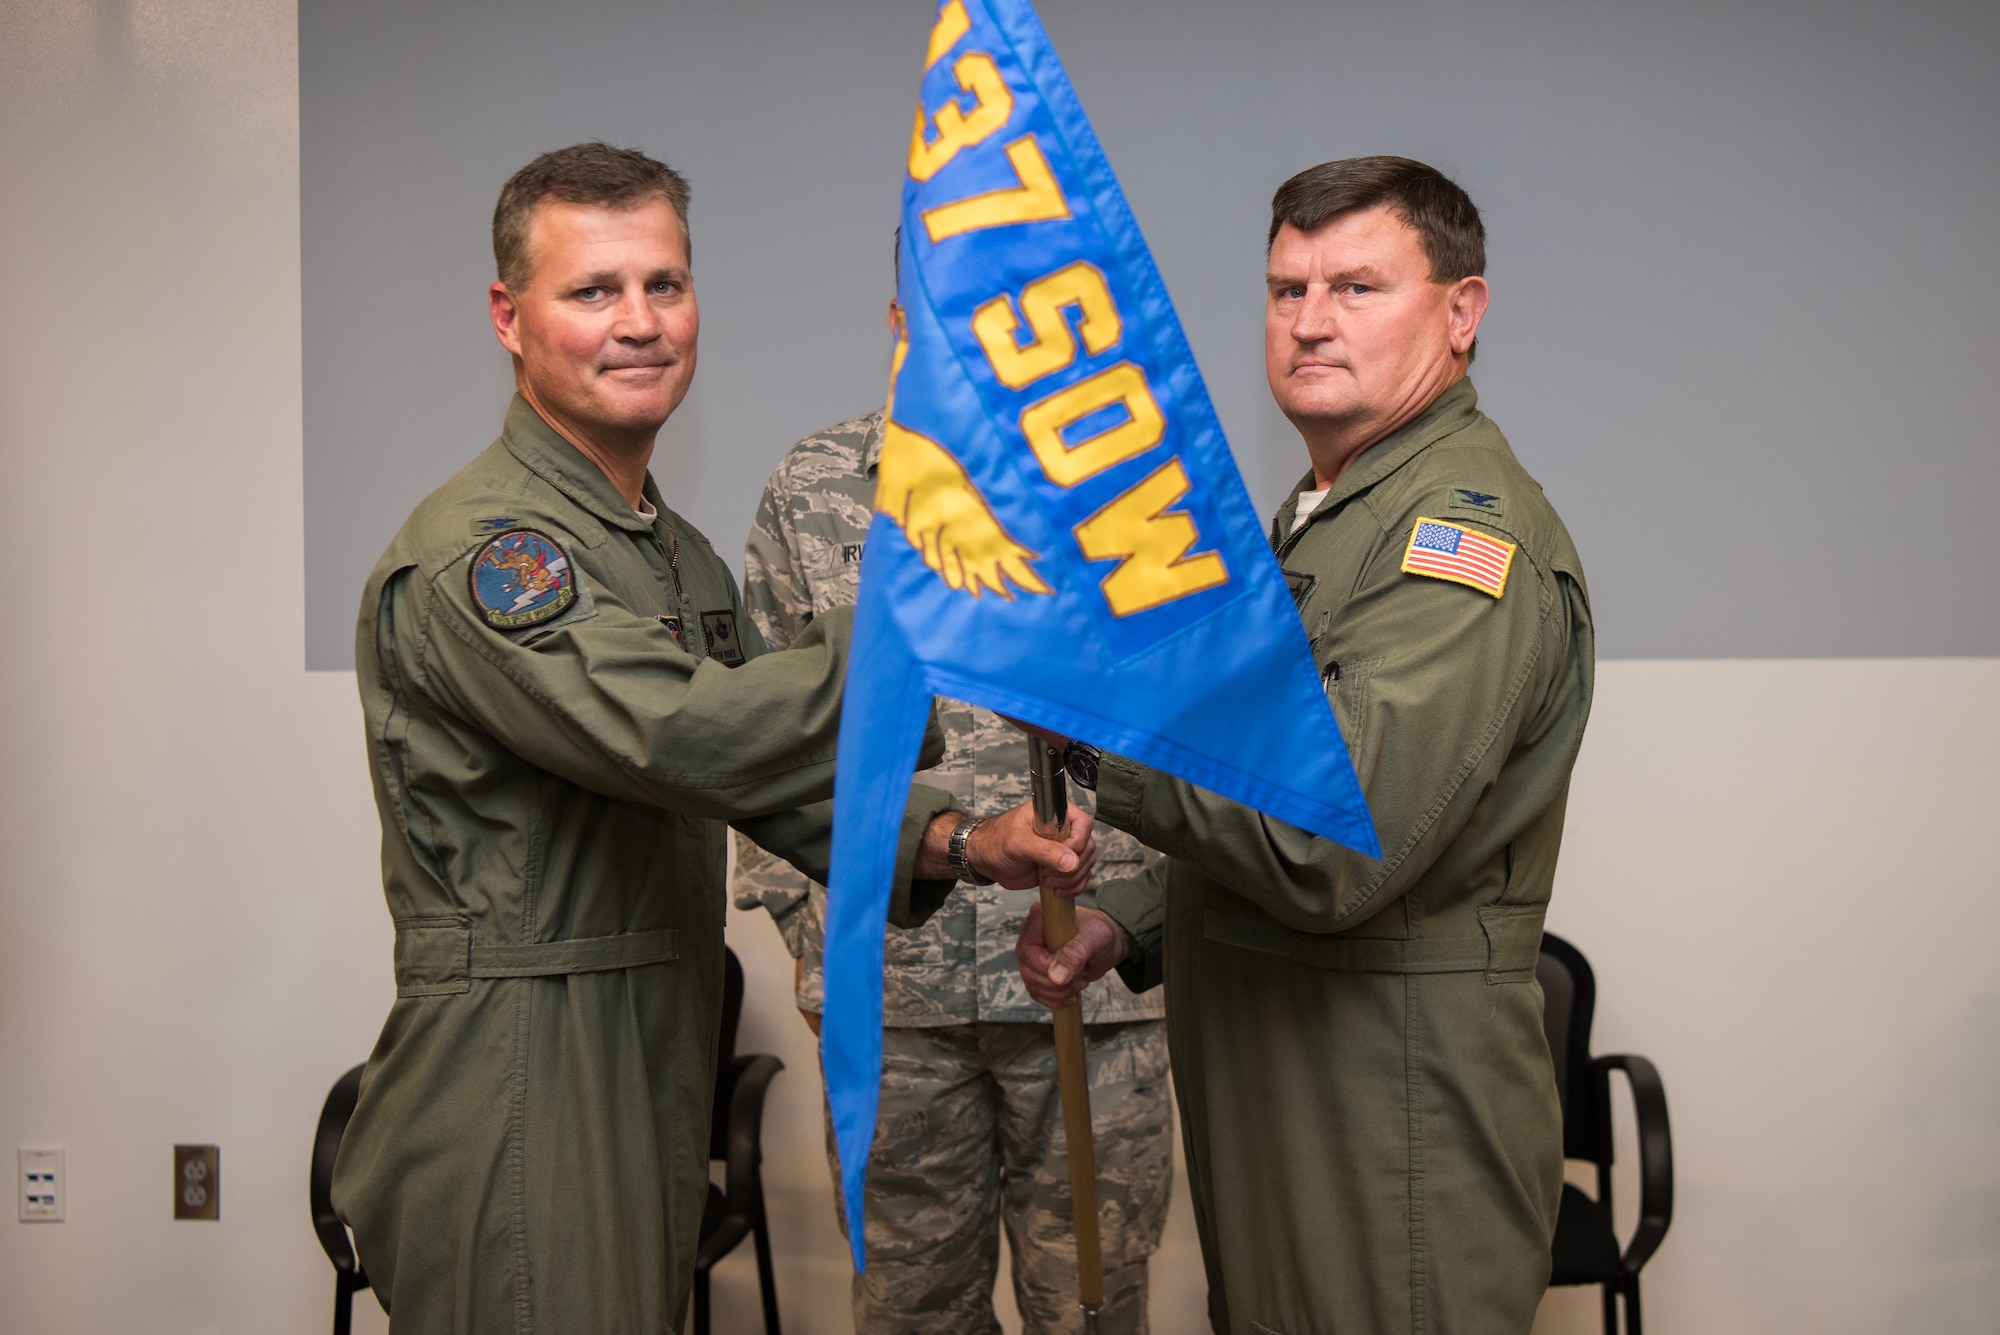 Col. Devin R. Wooden, 137th Special Operations Wing commander (left), and Col. Kelly W. Cobble, outgoing 137th Special Operations Group commander (right), pose with the 137th SOG guide-on during the Group’s change of command ceremony at Will Rogers Air National Guard Base in Oklahoma City, May 17, 2018. Col. Daniel R. “Pinto” Fowler, formerly the Air National Guard's Advisor to U.S. Air Force Special Operations Command, Hurlbert Field, Fla., assumed command with more than 20 years of military experience, including three years as a Joint Terminal Attack Control qualified Air Liaison Officer and 12 years of flying. (U.S. Air National Guard photo by Staff Sgt. Kasey Phipps)